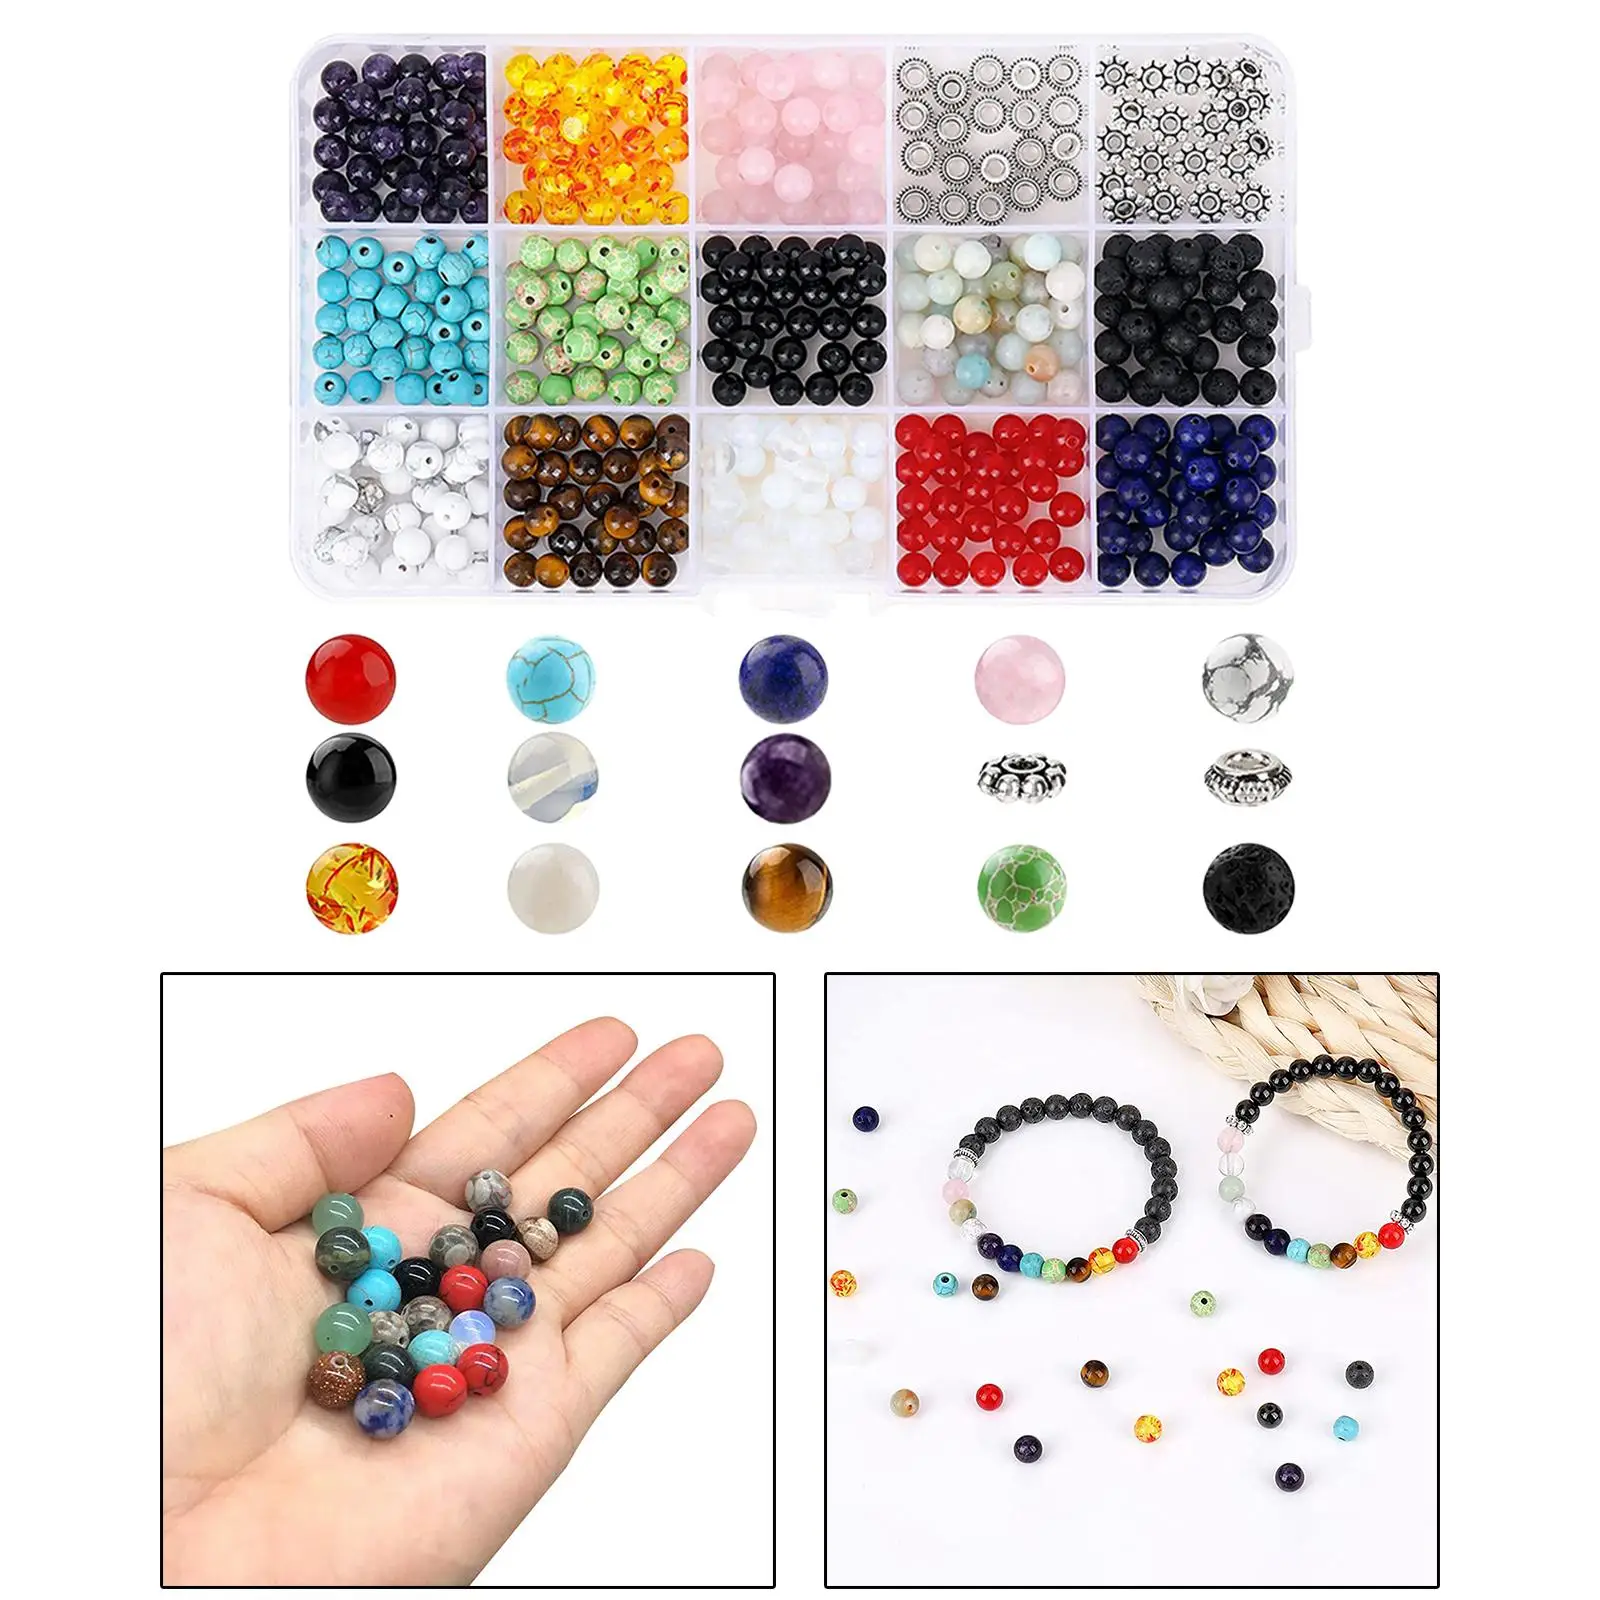 

410pcs Natural Beads Polished Beading 6mm Loose Beads Gem Crystal Jewelry Making (15 Materials)